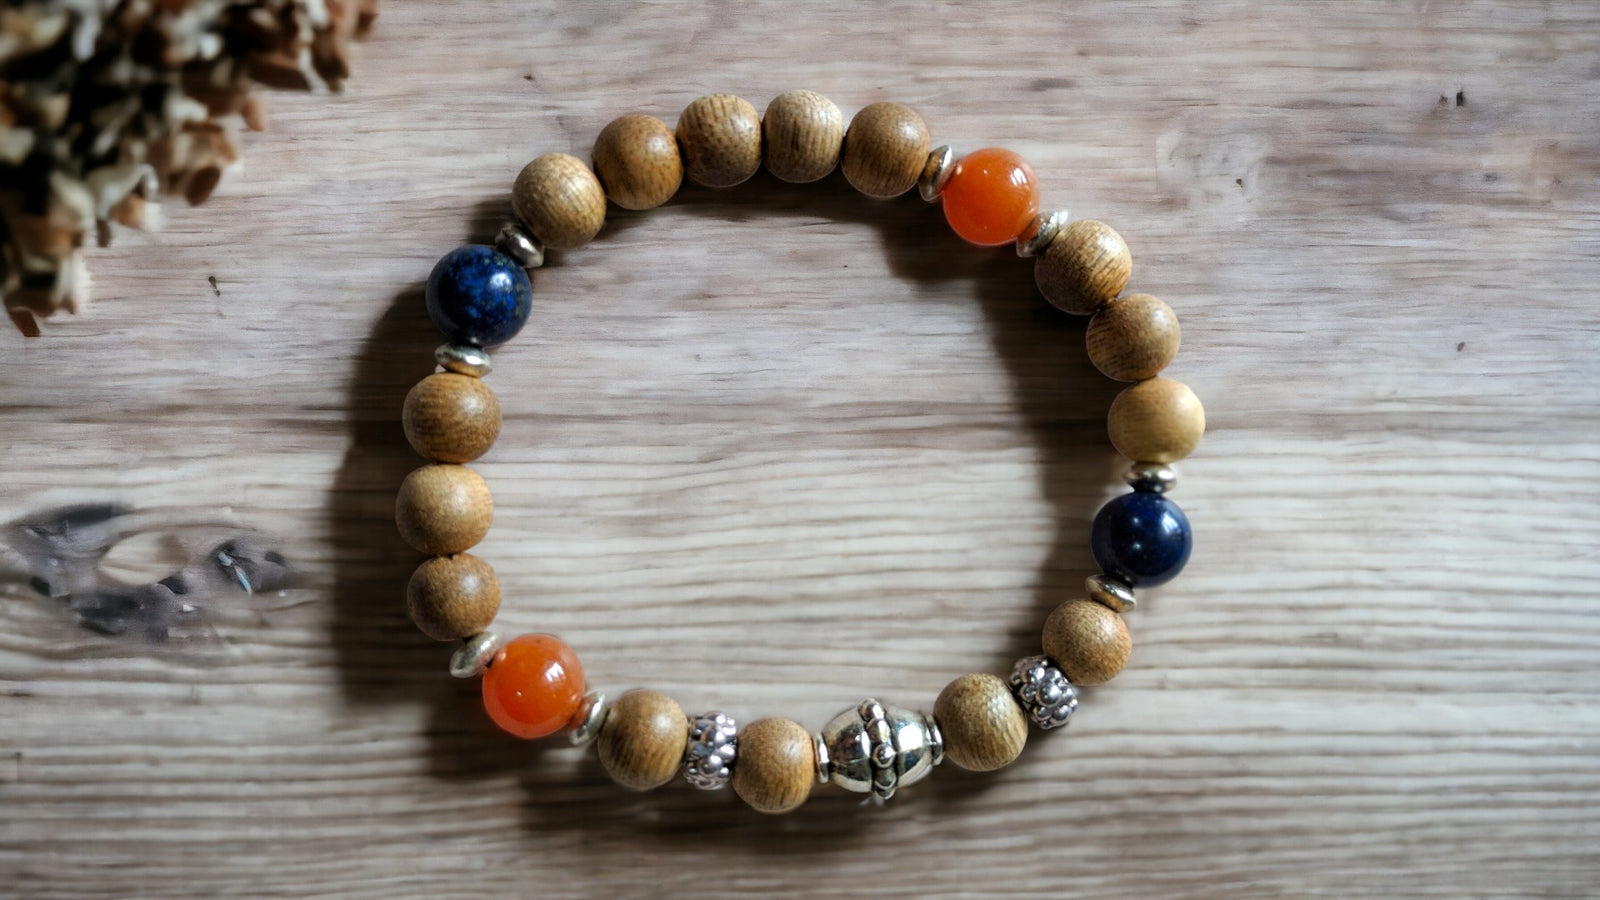 *New* The 4 Elements Metal, Wood, Water, Fire cultivated agarwood gemstone bracelet